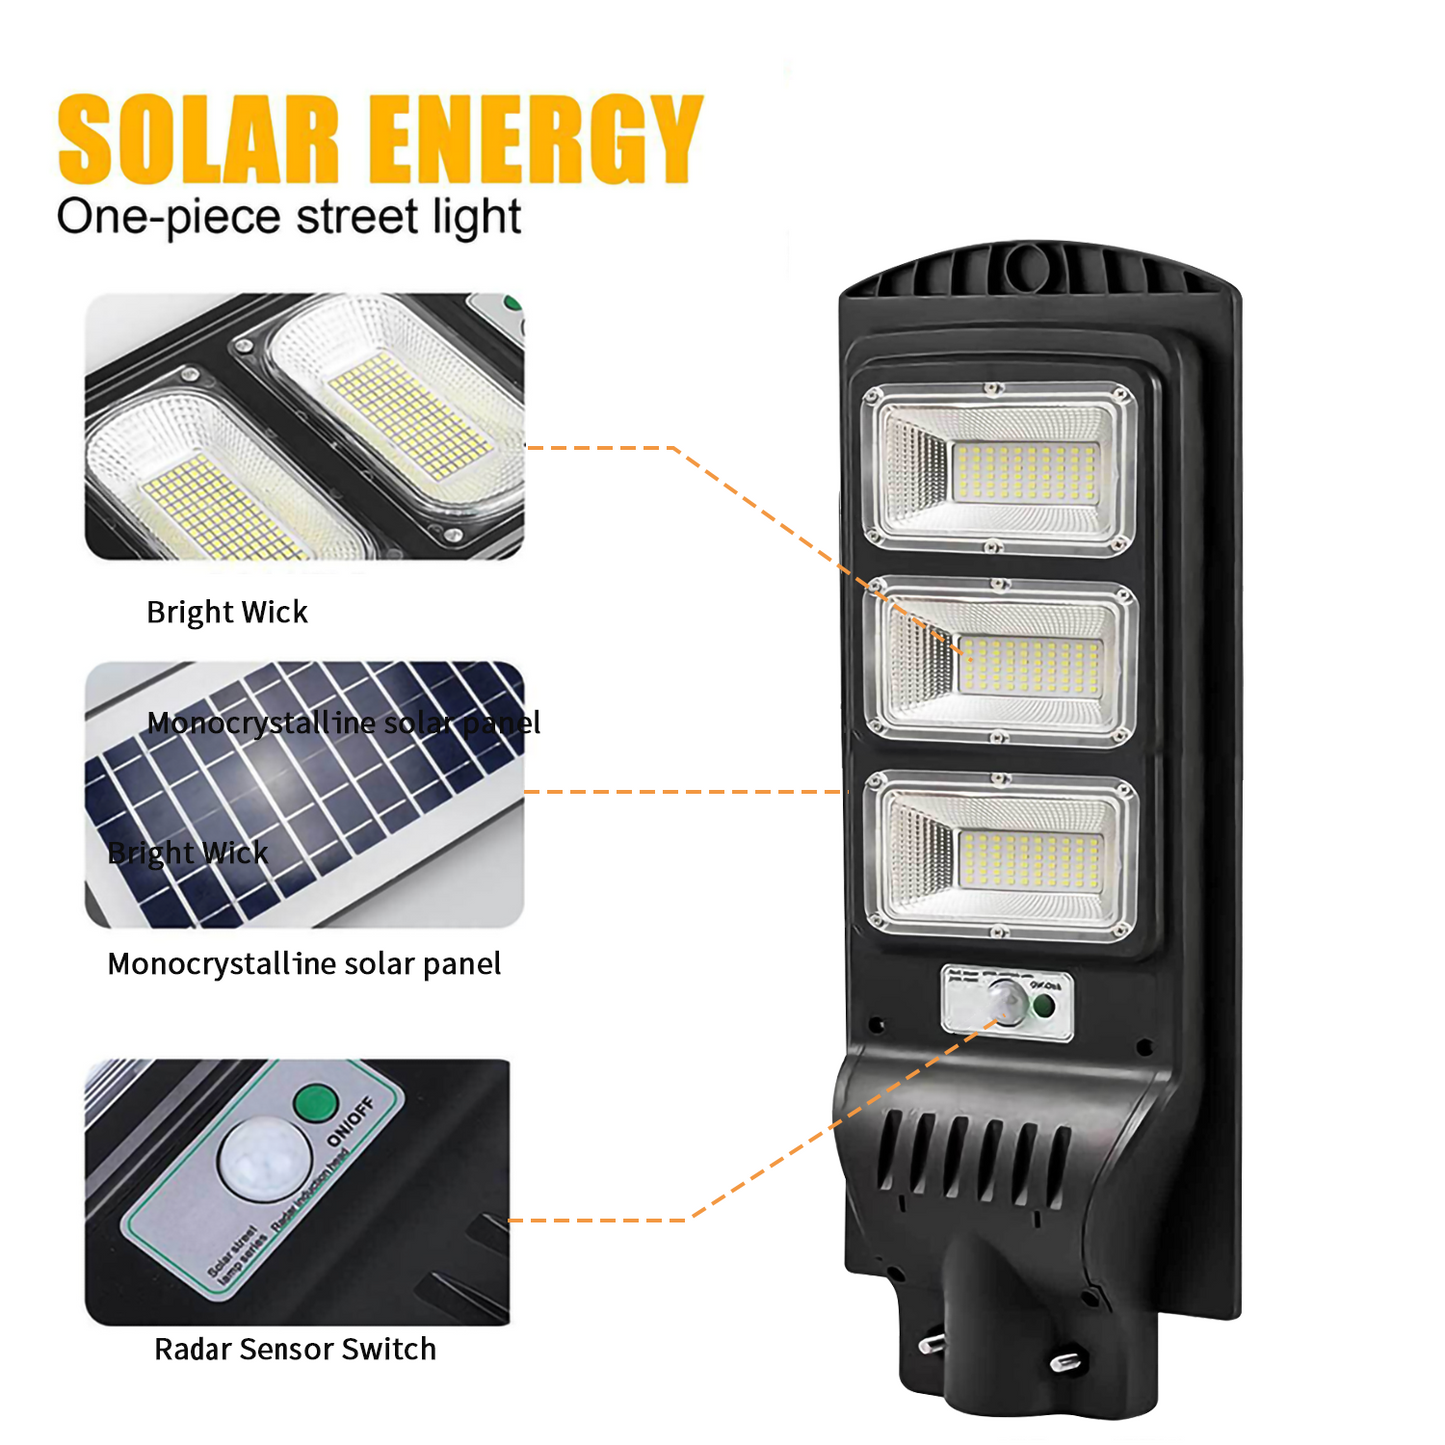 Commercial Solar Street Light Motion Sensor, 120000LM Waterproof Solar Security Flood Lights Outdoor, Dusk to Dawn Solar LED Lights Lamp with Remote Control for Garden, Yard, Path, Parking Lot